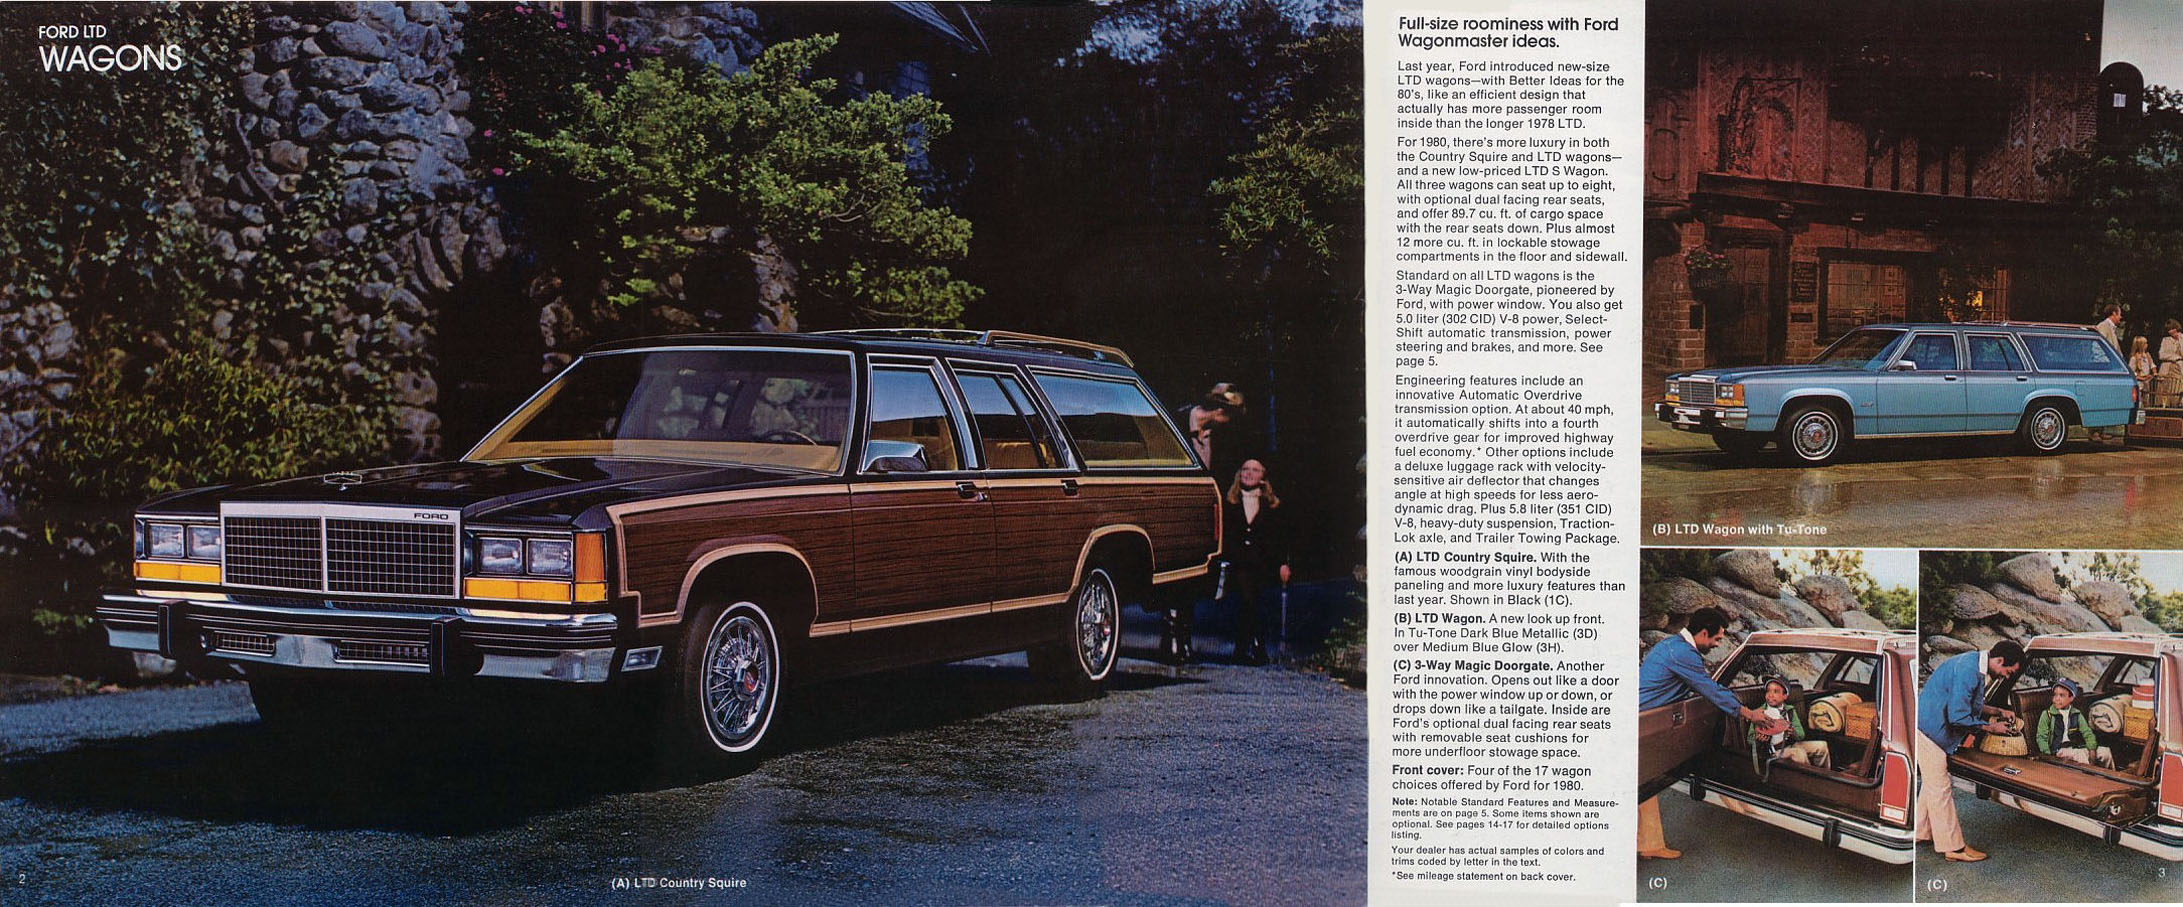 1980_Ford_Wagons-02